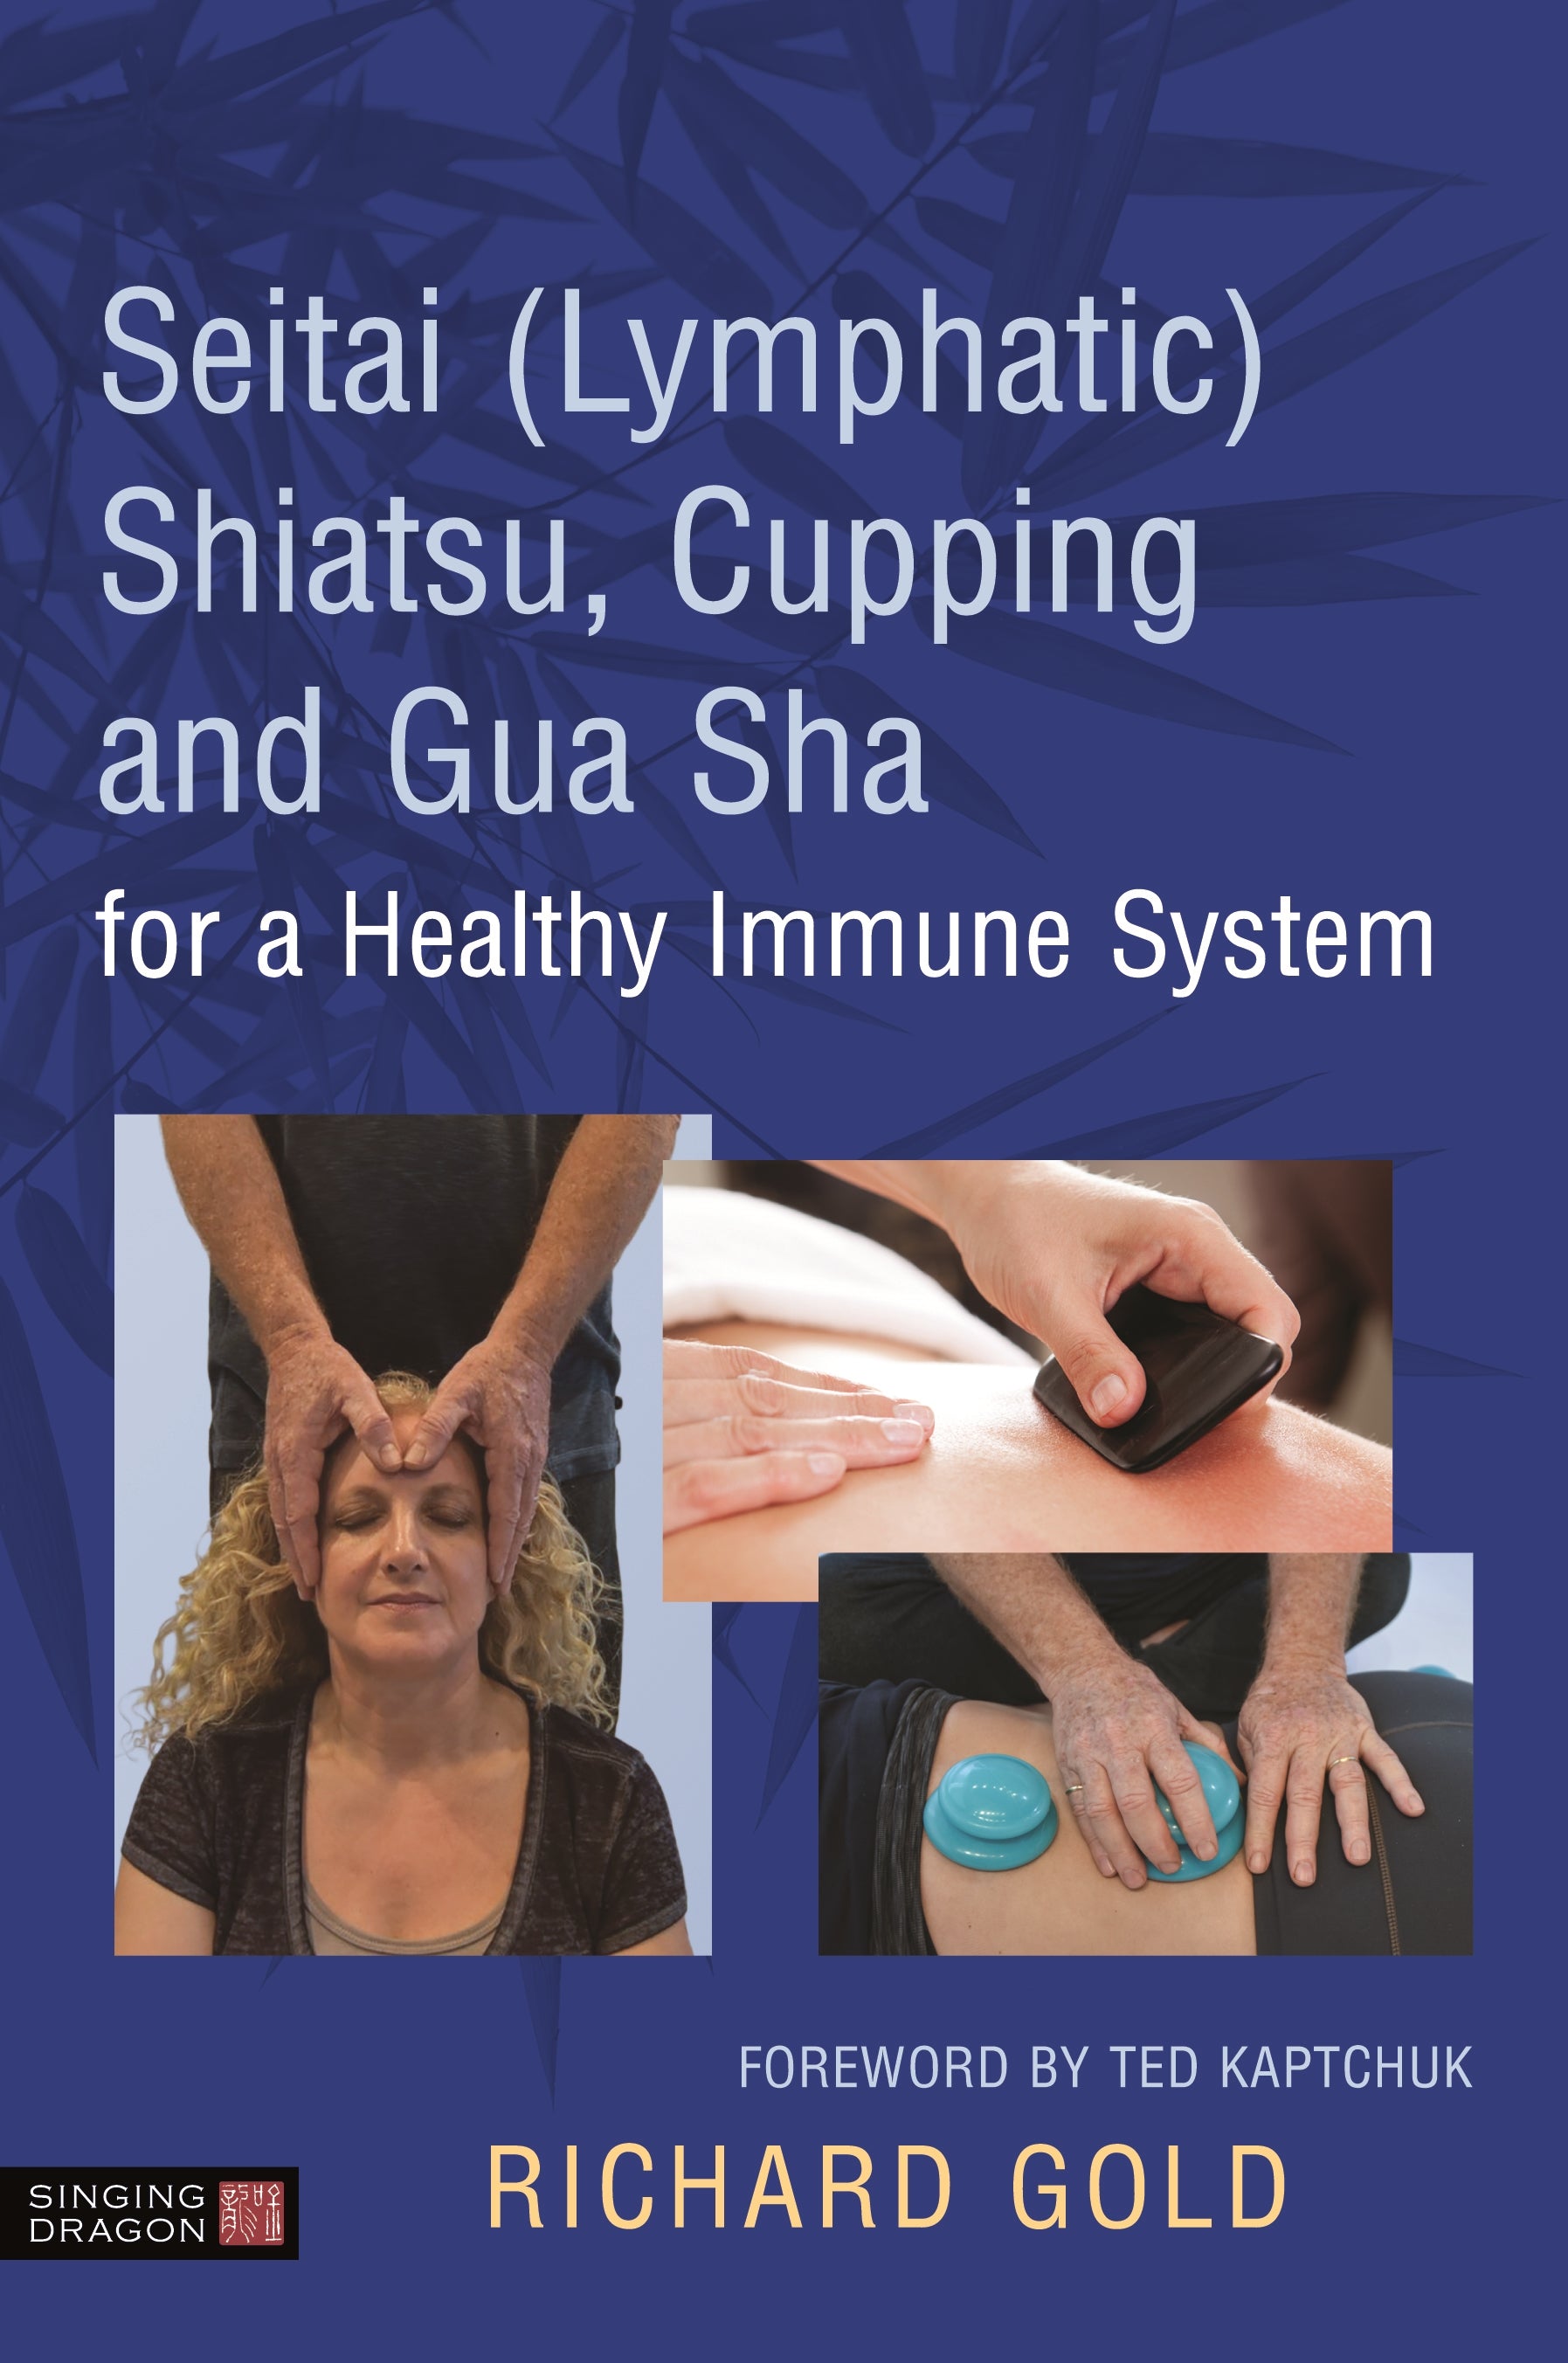 Seitai (Lymphatic) Shiatsu, Cupping and Gua Sha for a Healthy Immune System by Dr. Richard Gold, Ted Kaptchuk, Kenneth Goff